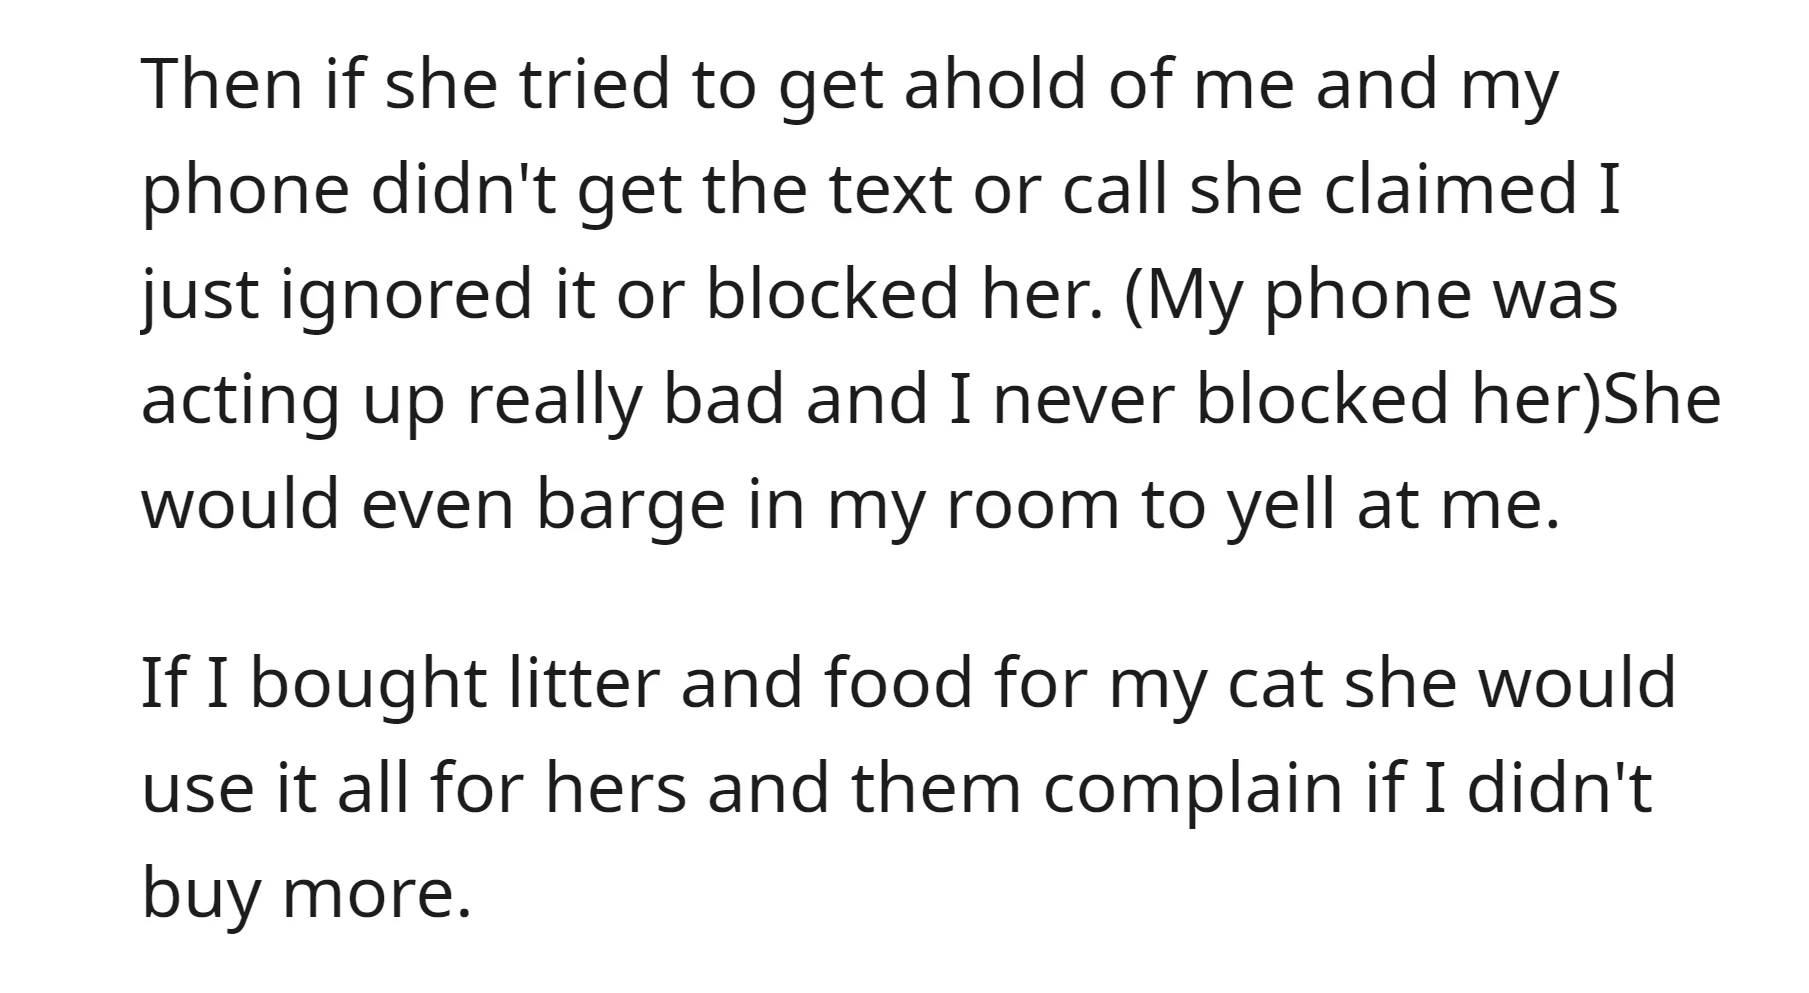 The roommate invaded OP's privacy by barging into her room, and consumed her cat food